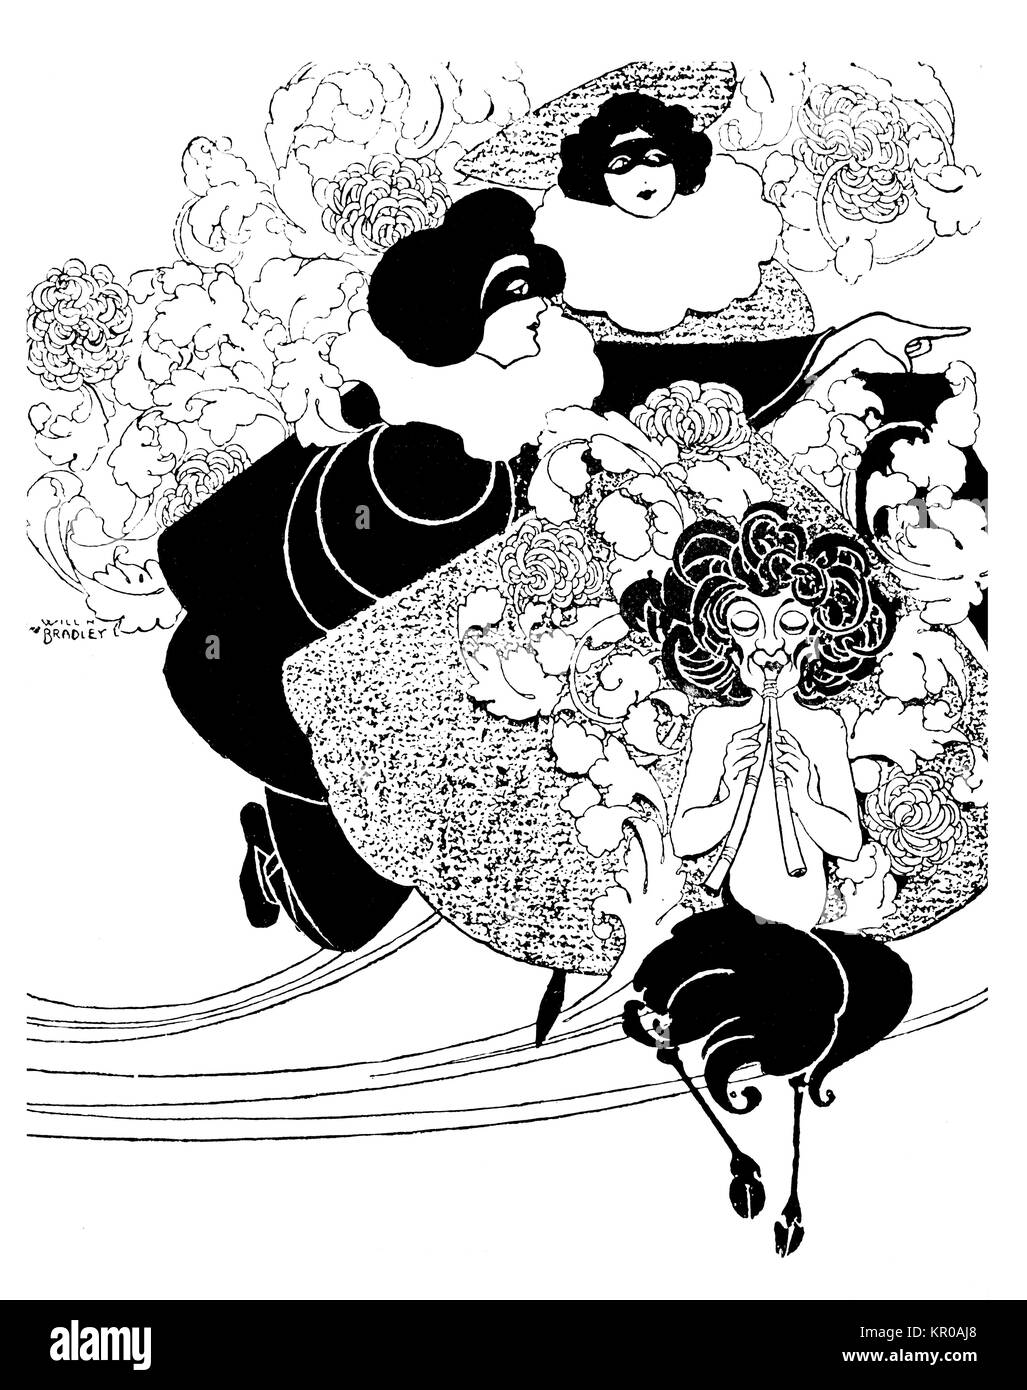 from The Masqueraders, poster illustration by American illustrator W H Bradley from 1894 Studio Magazine Stock Photo